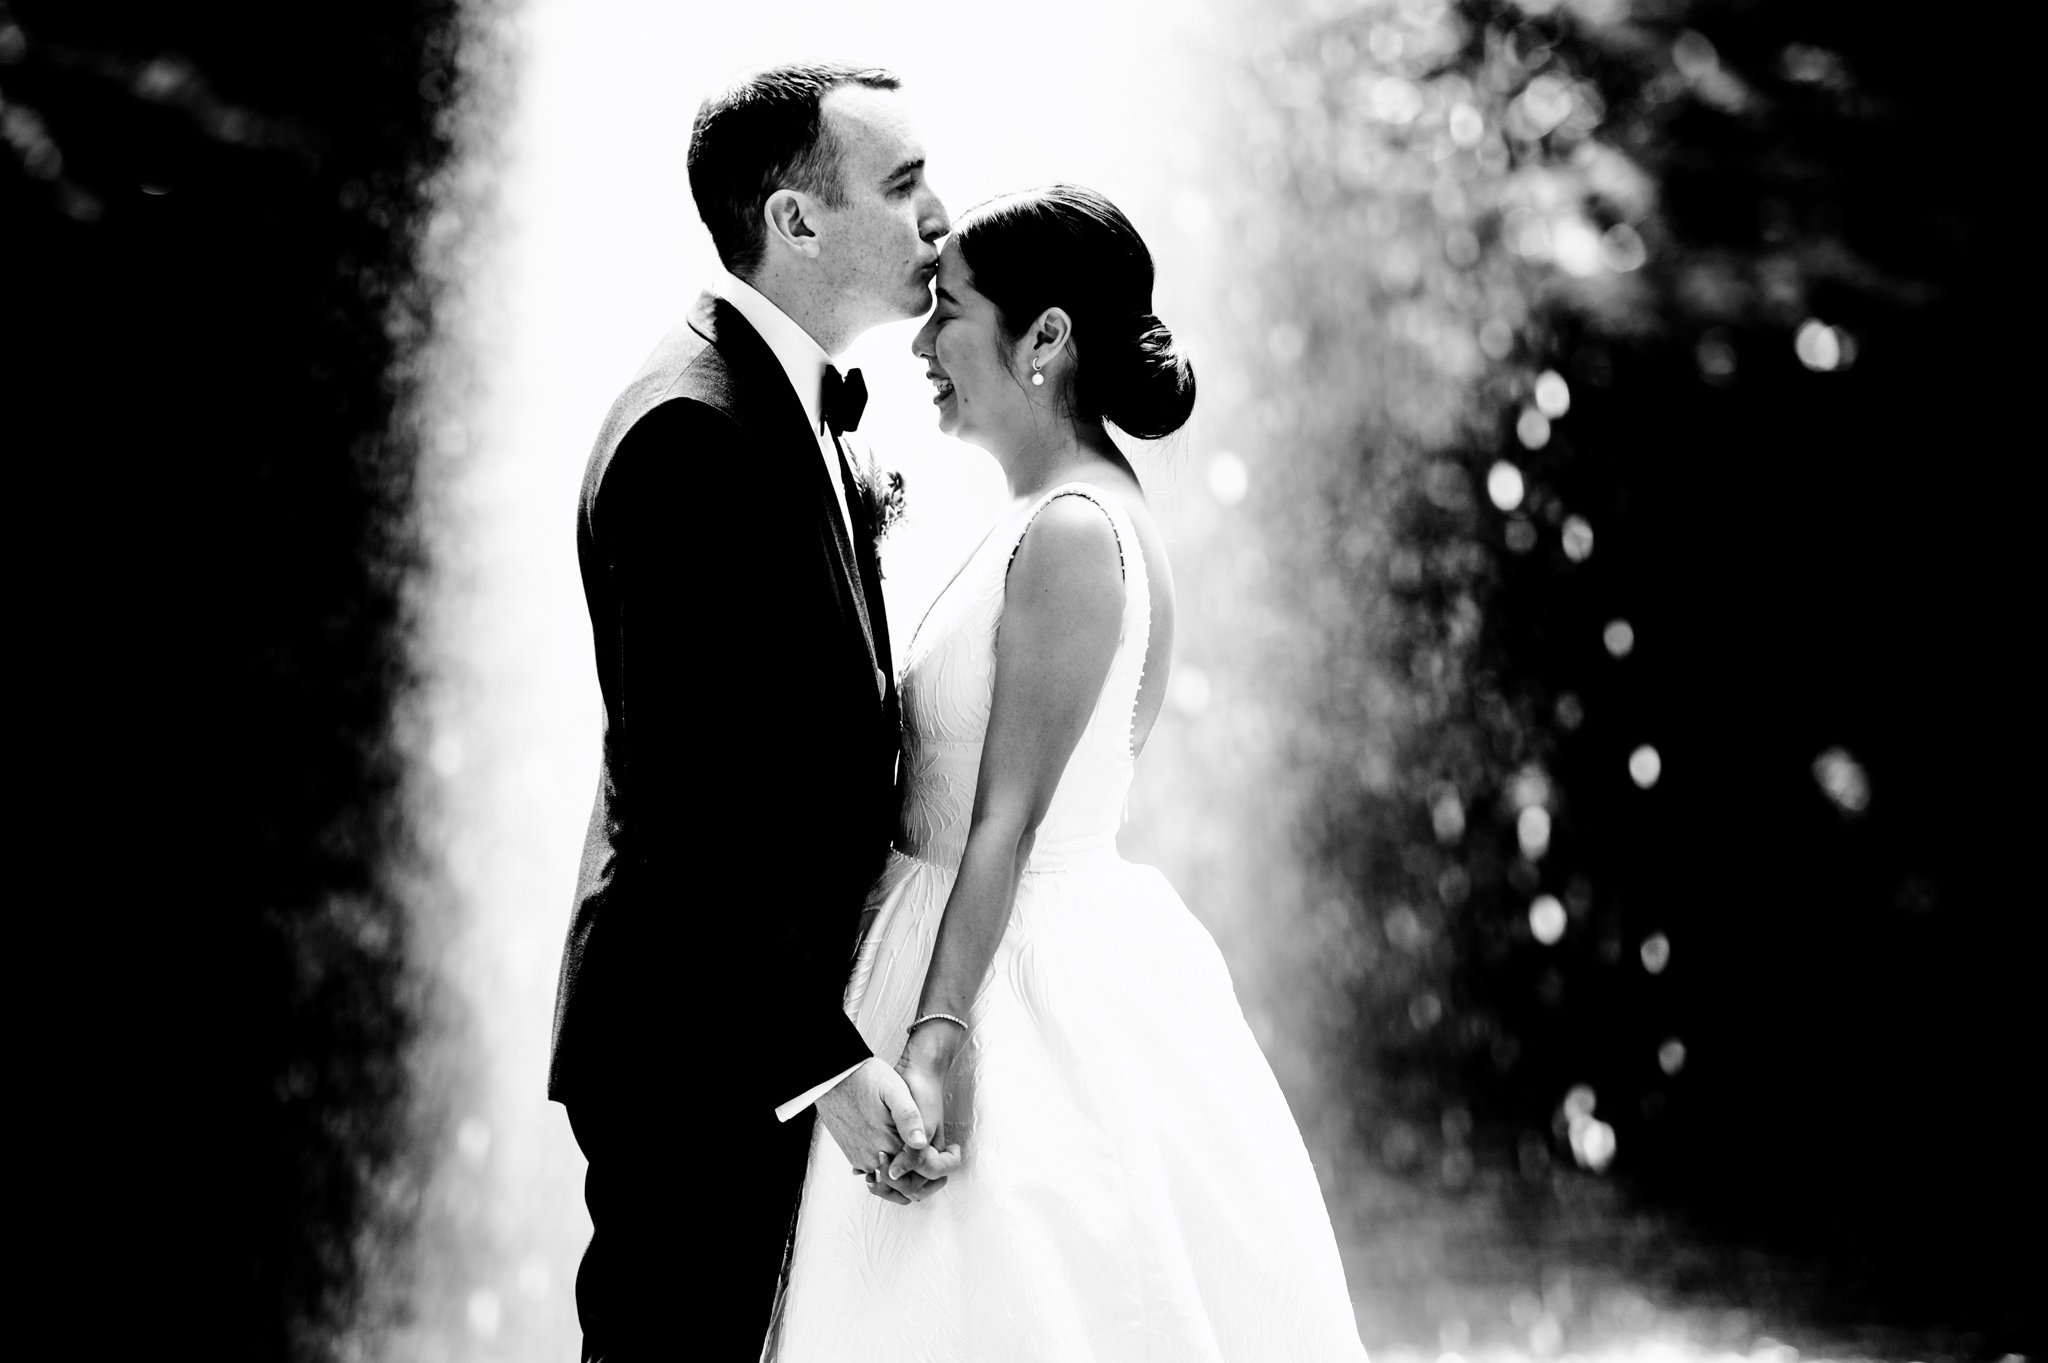 A bride and groom kiss in front of a waterfall.